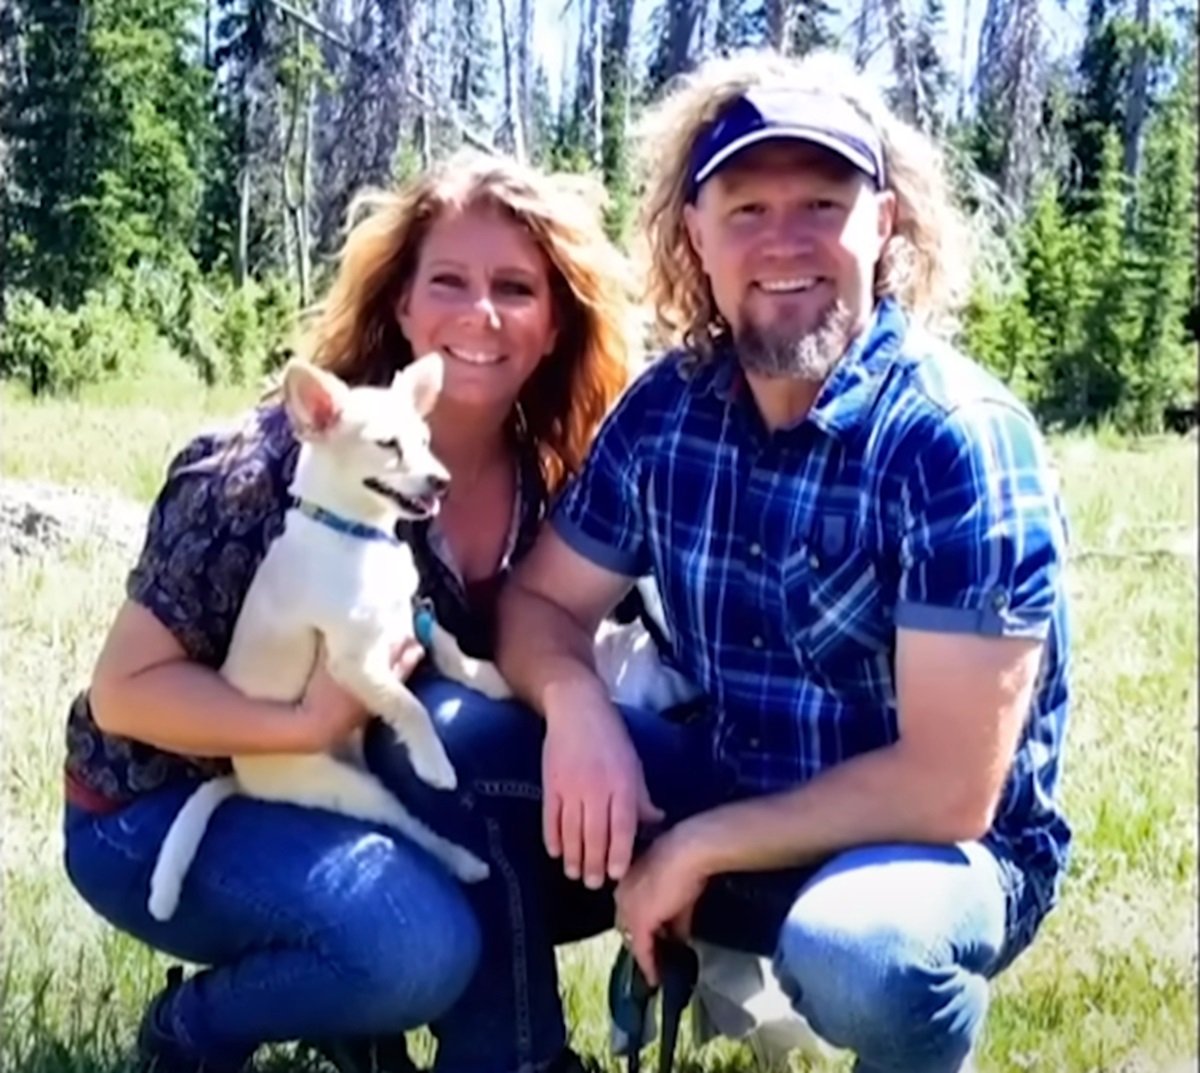 Meri Brown and Kody Brown pictured together outside with Meri holding her dog in front of a forest